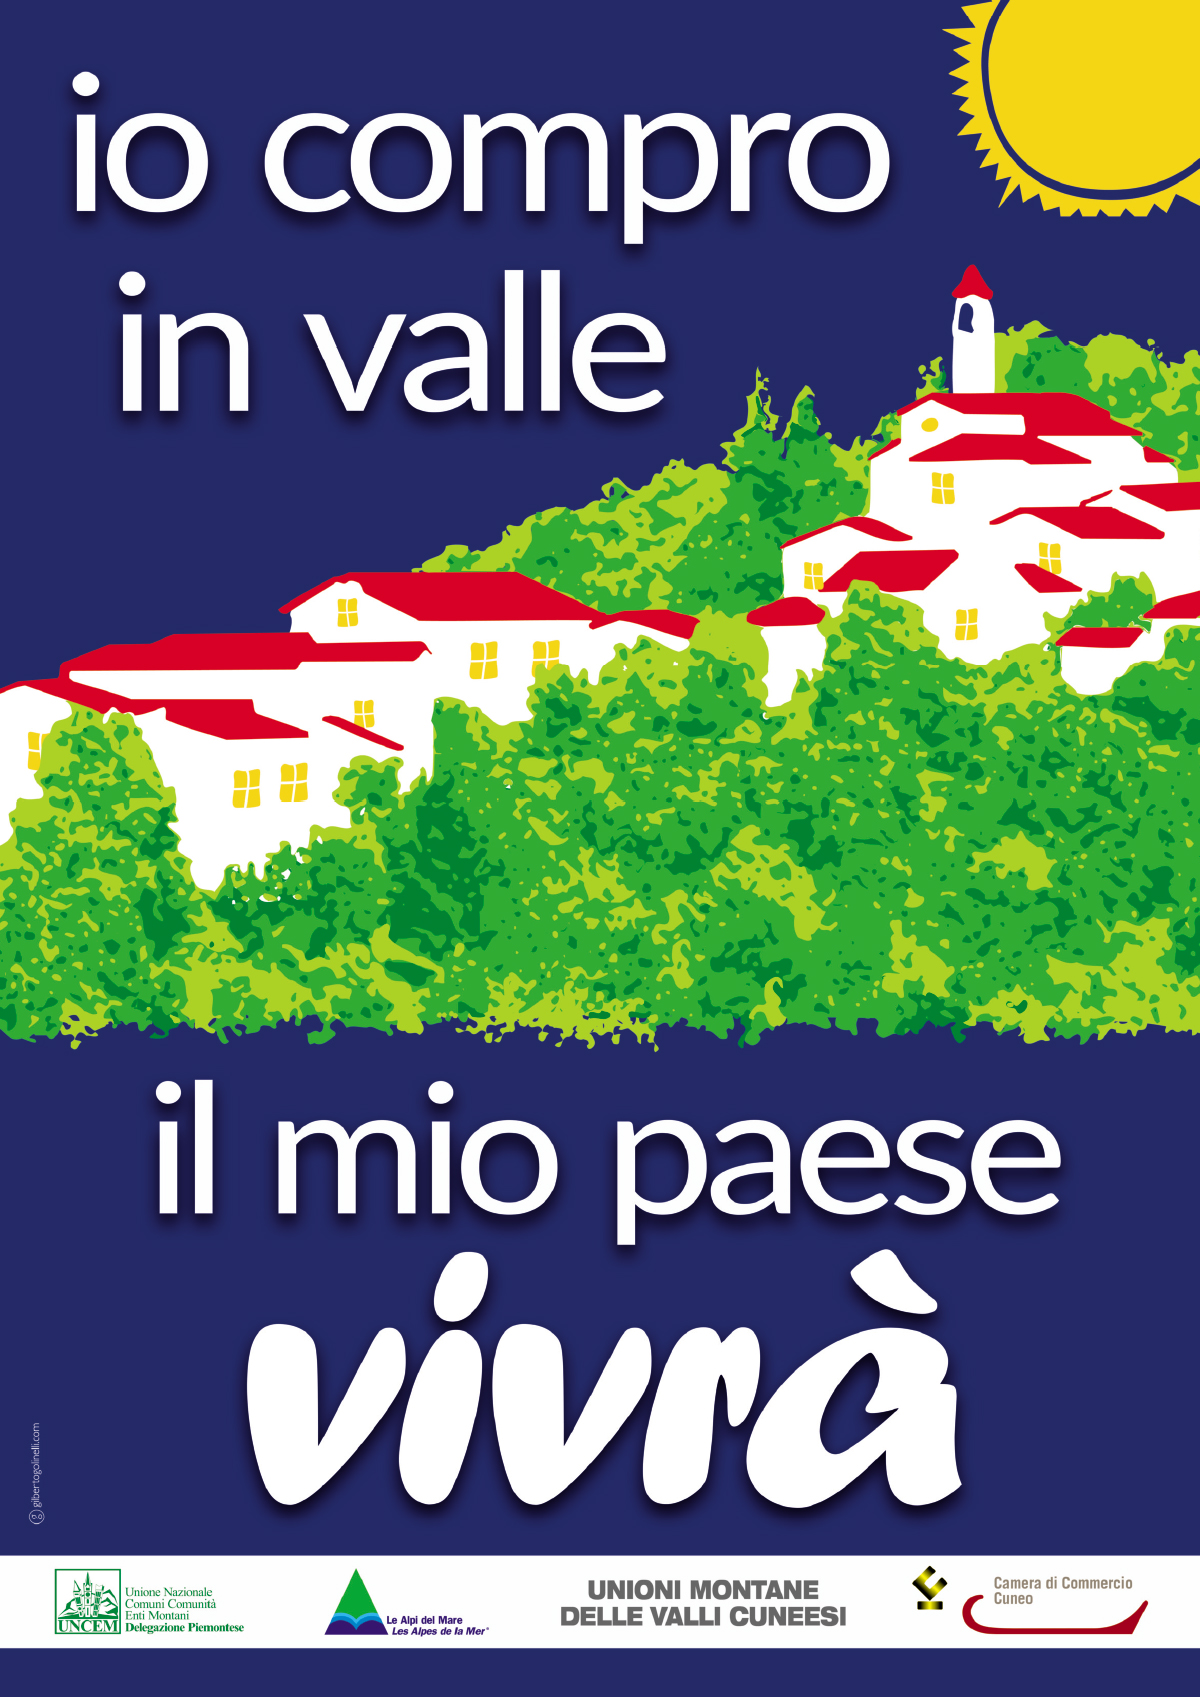 Compro in valle